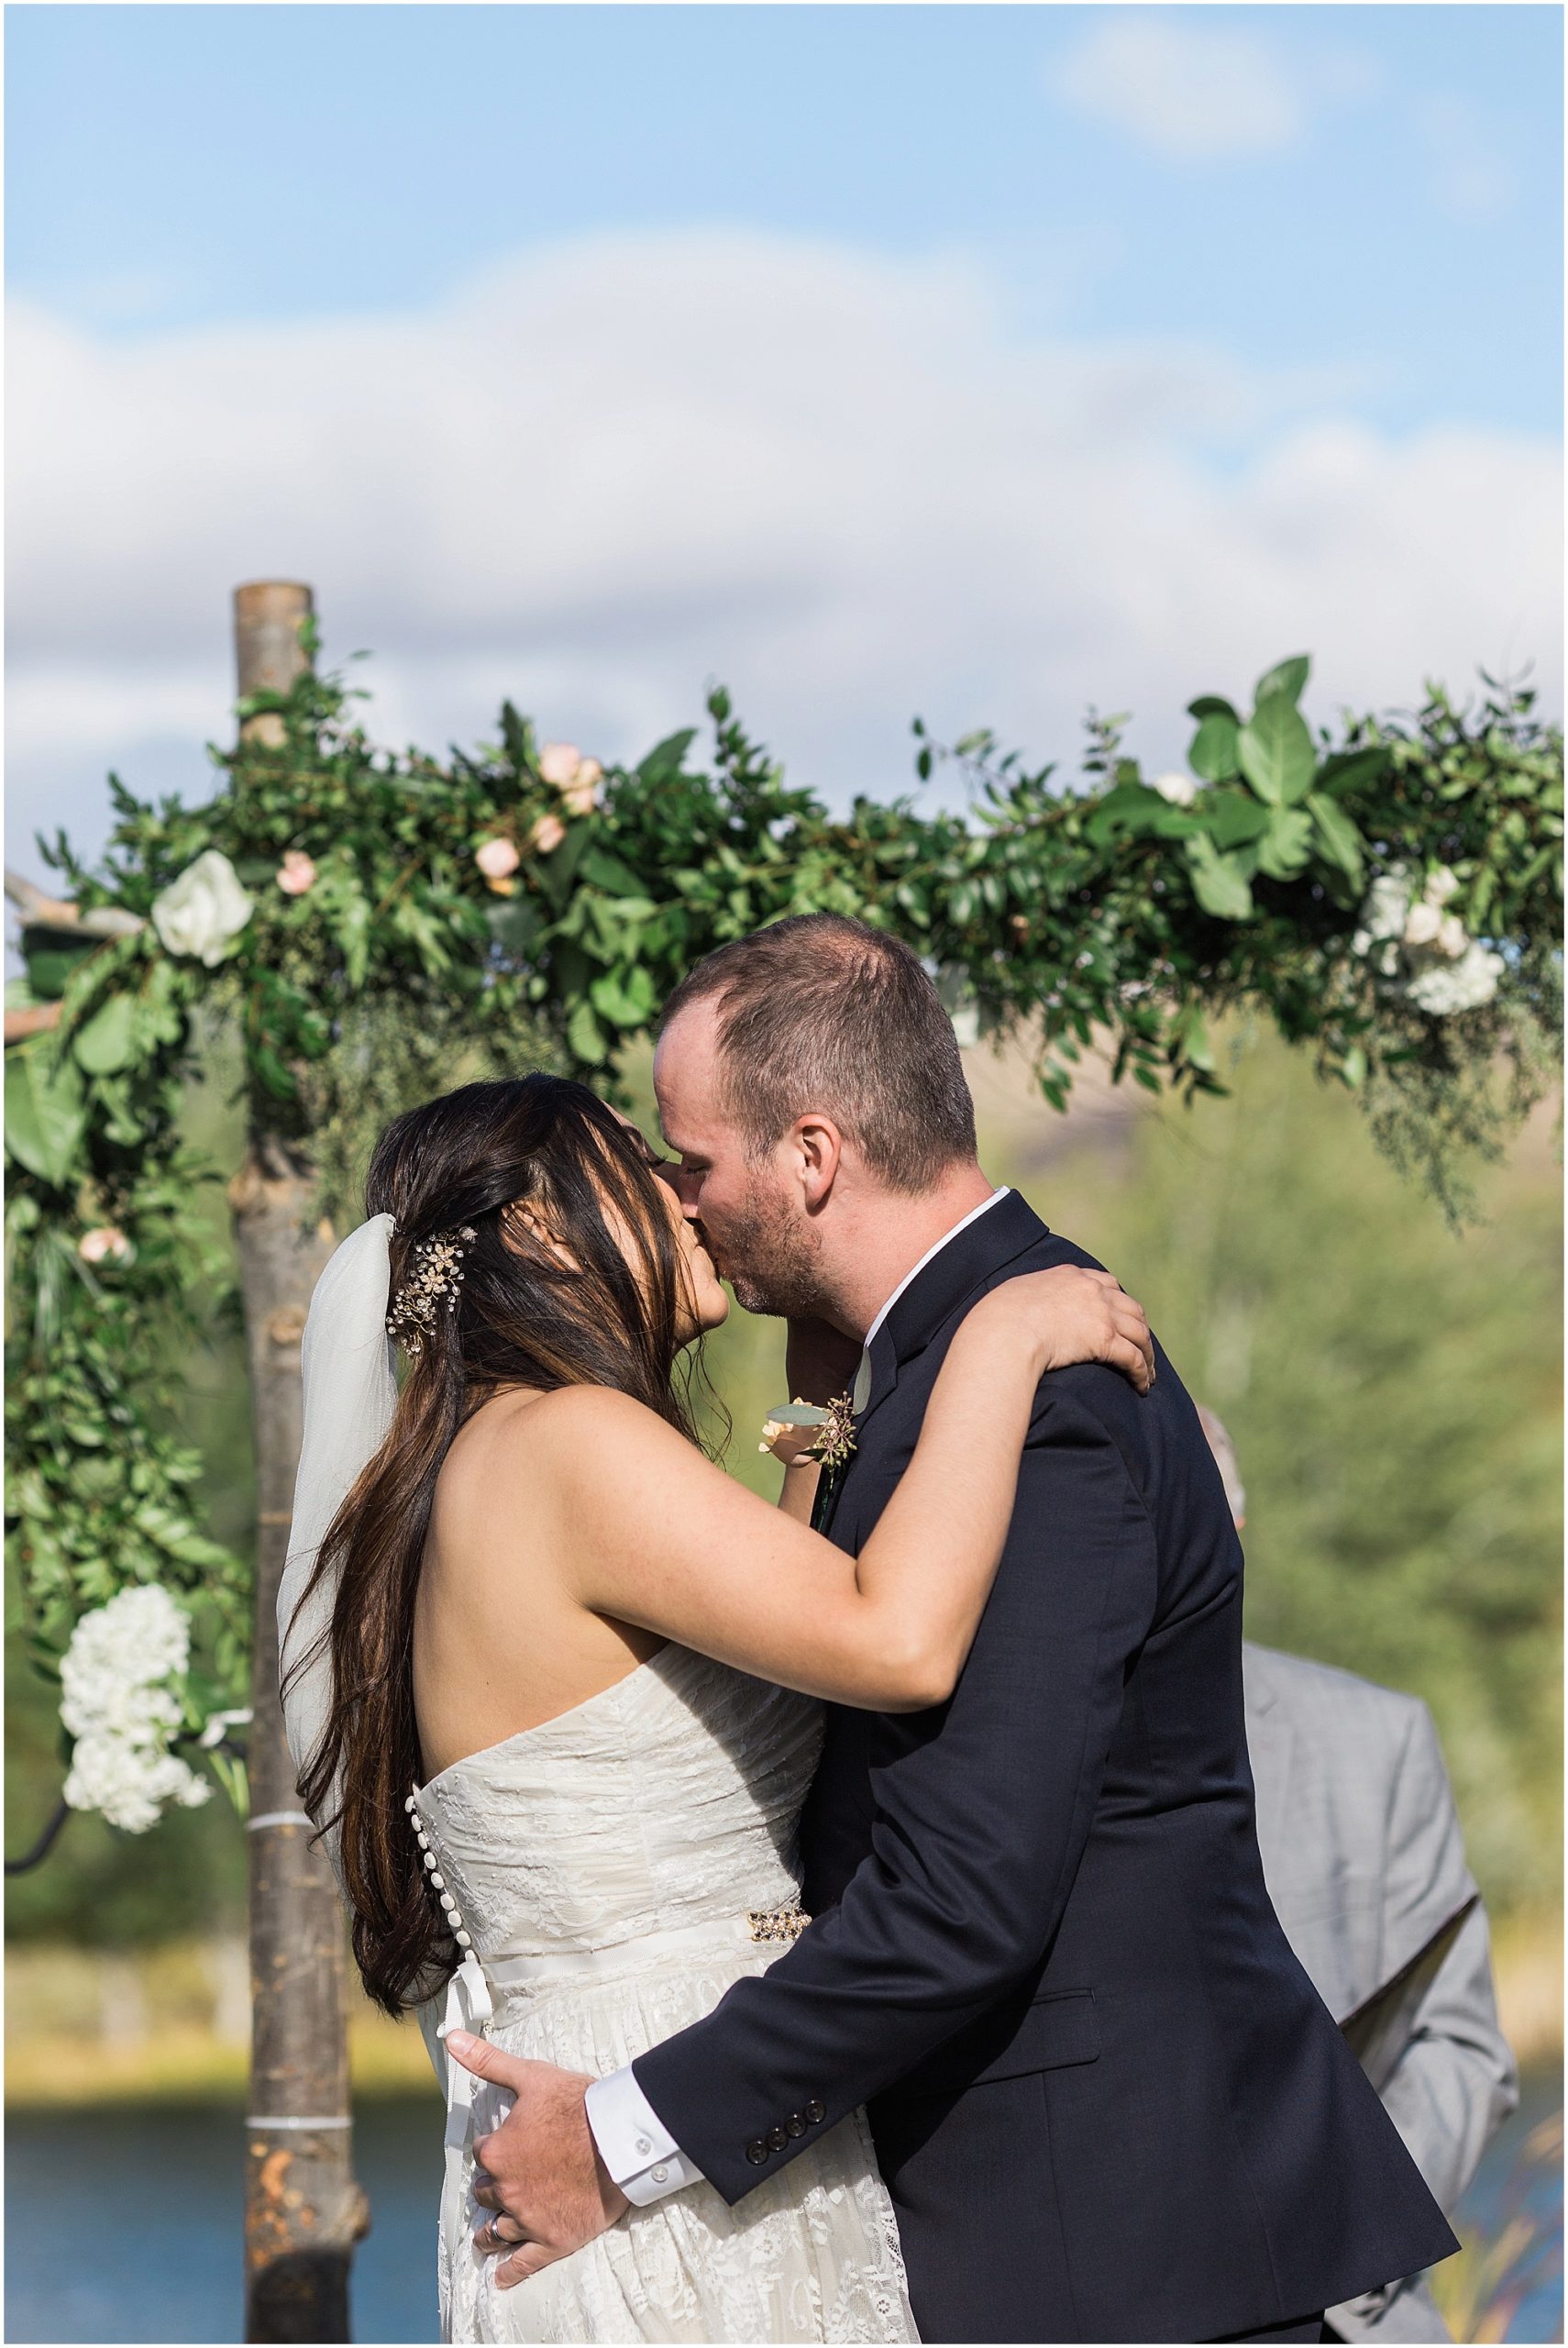 The couple's first kiss during the outdoor ceremony at the Tuscan Stables wedding venue at Ranch at the Canyons in Central Oregon. | Erica Swantek Photography